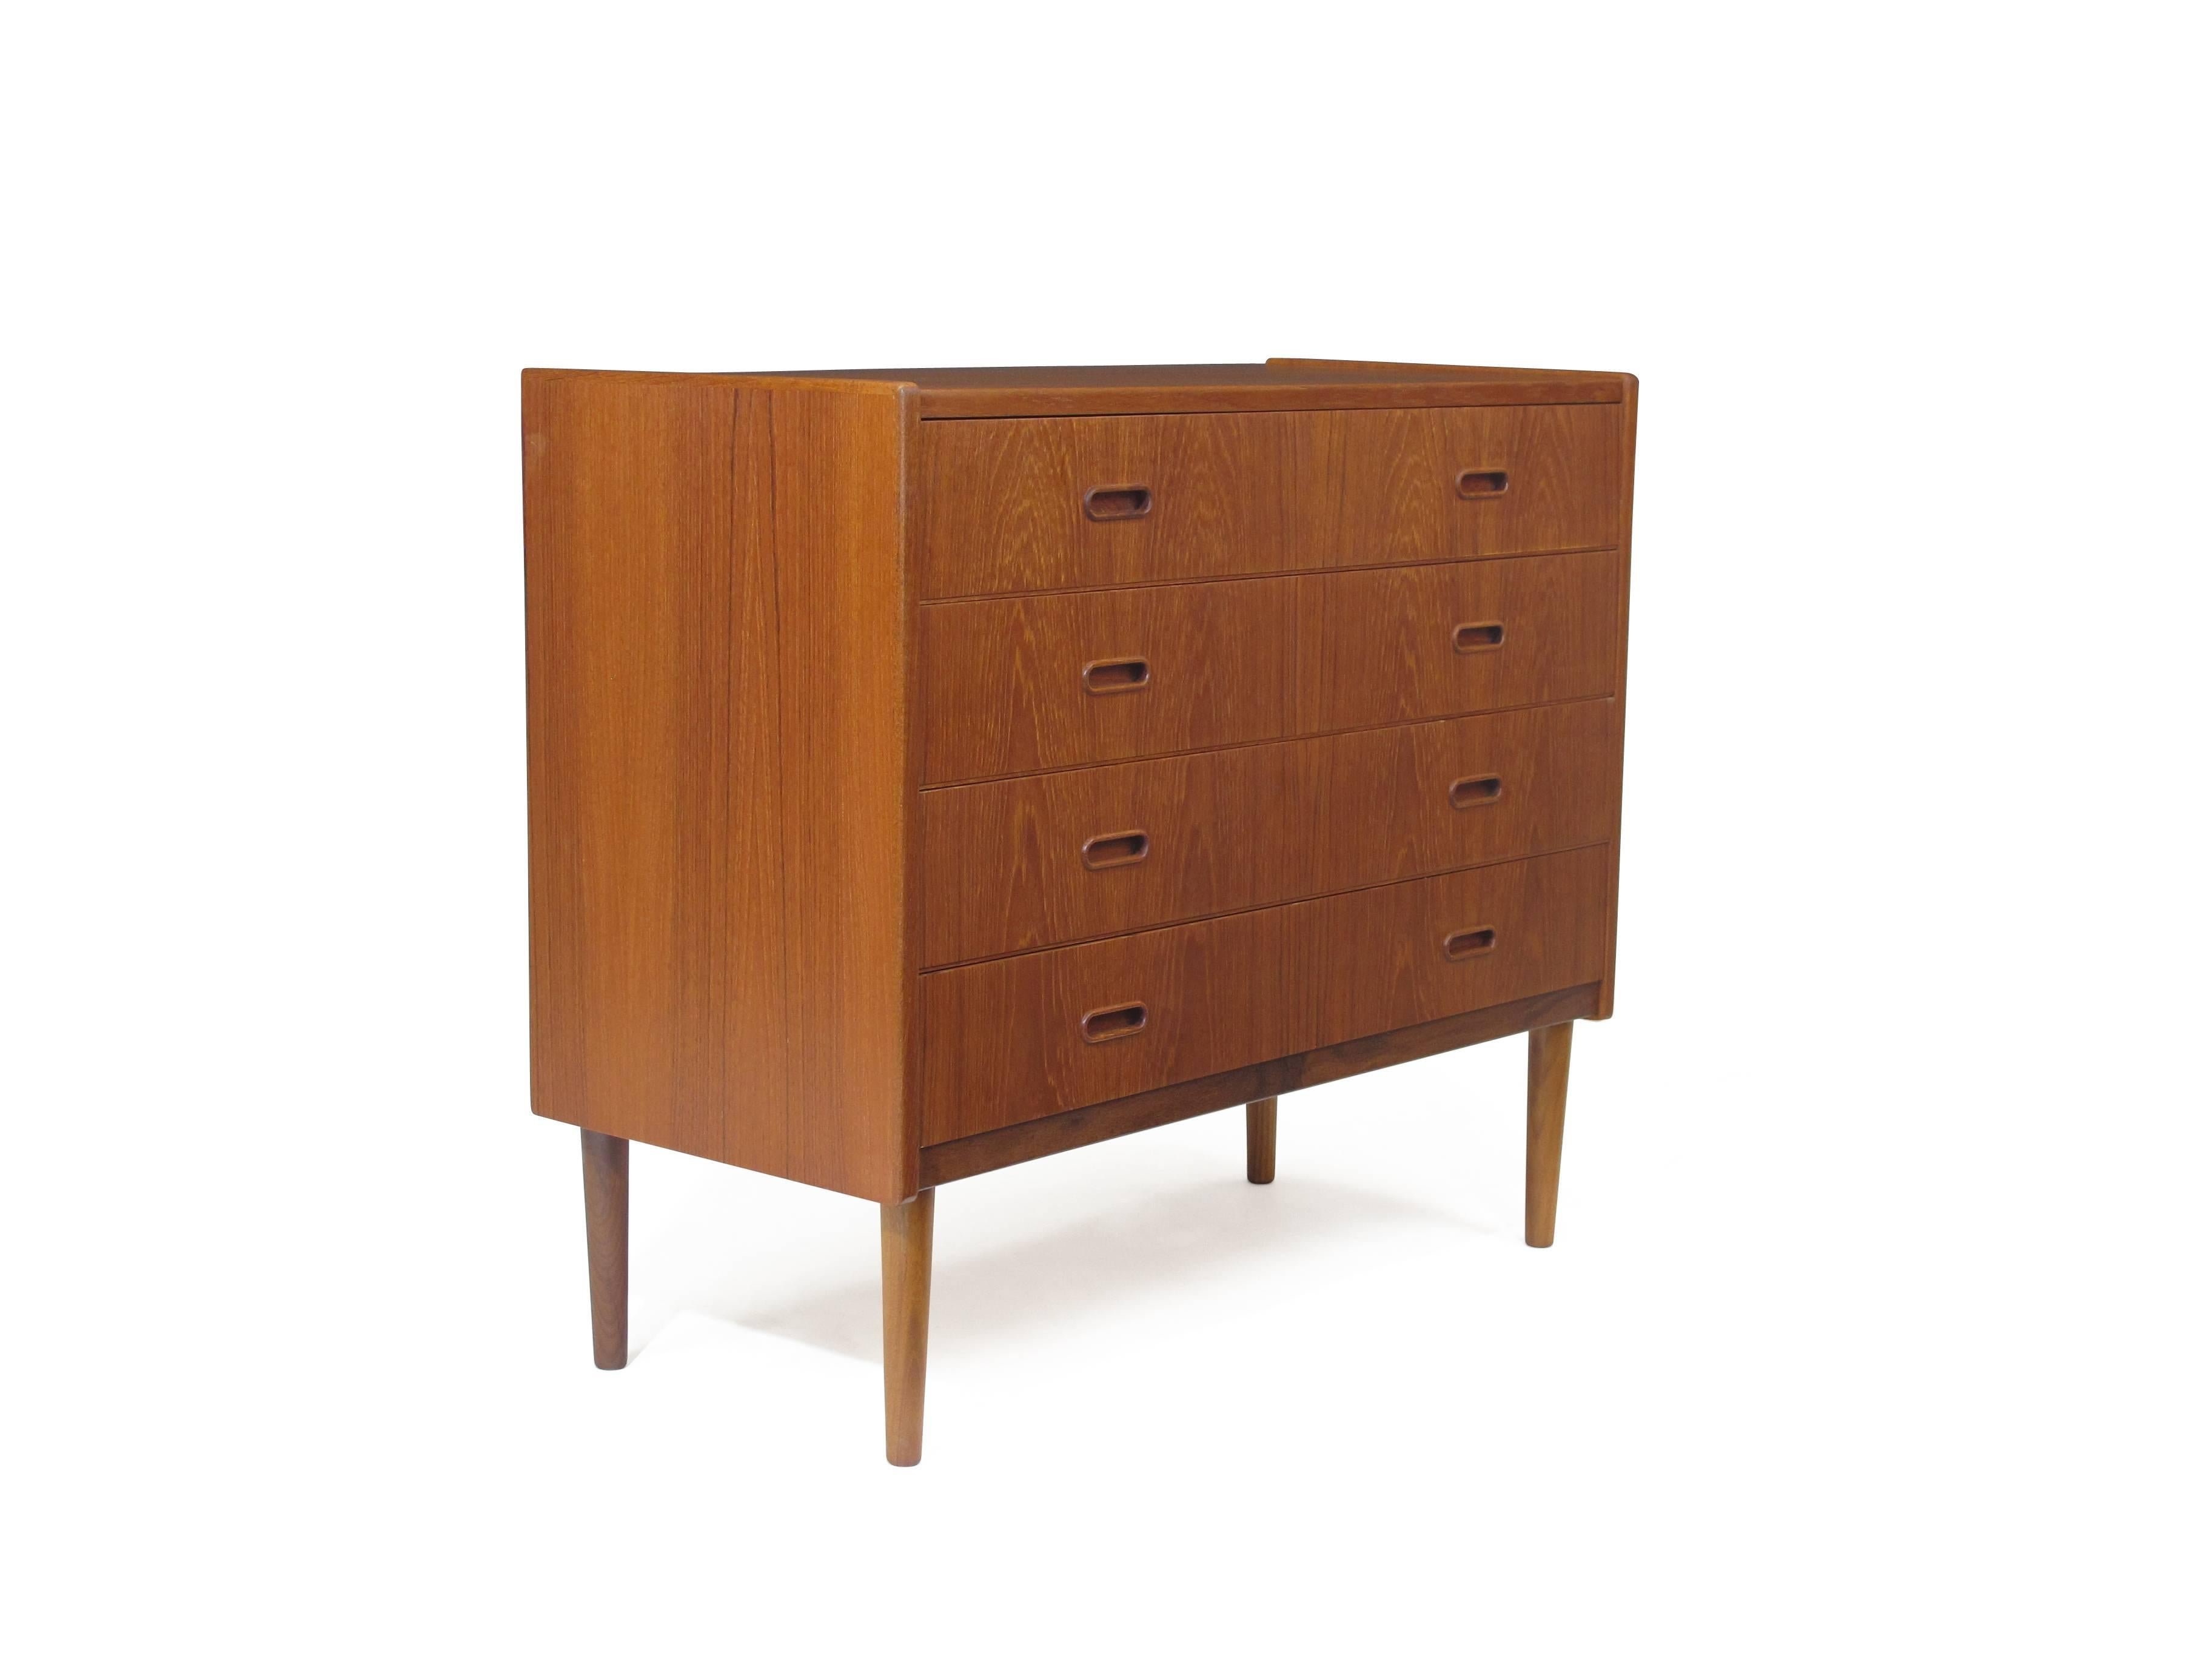 Midcentury four-drawer teak dresser with carved inset pulls, bookmatched graining, and solid turned tapered legs.